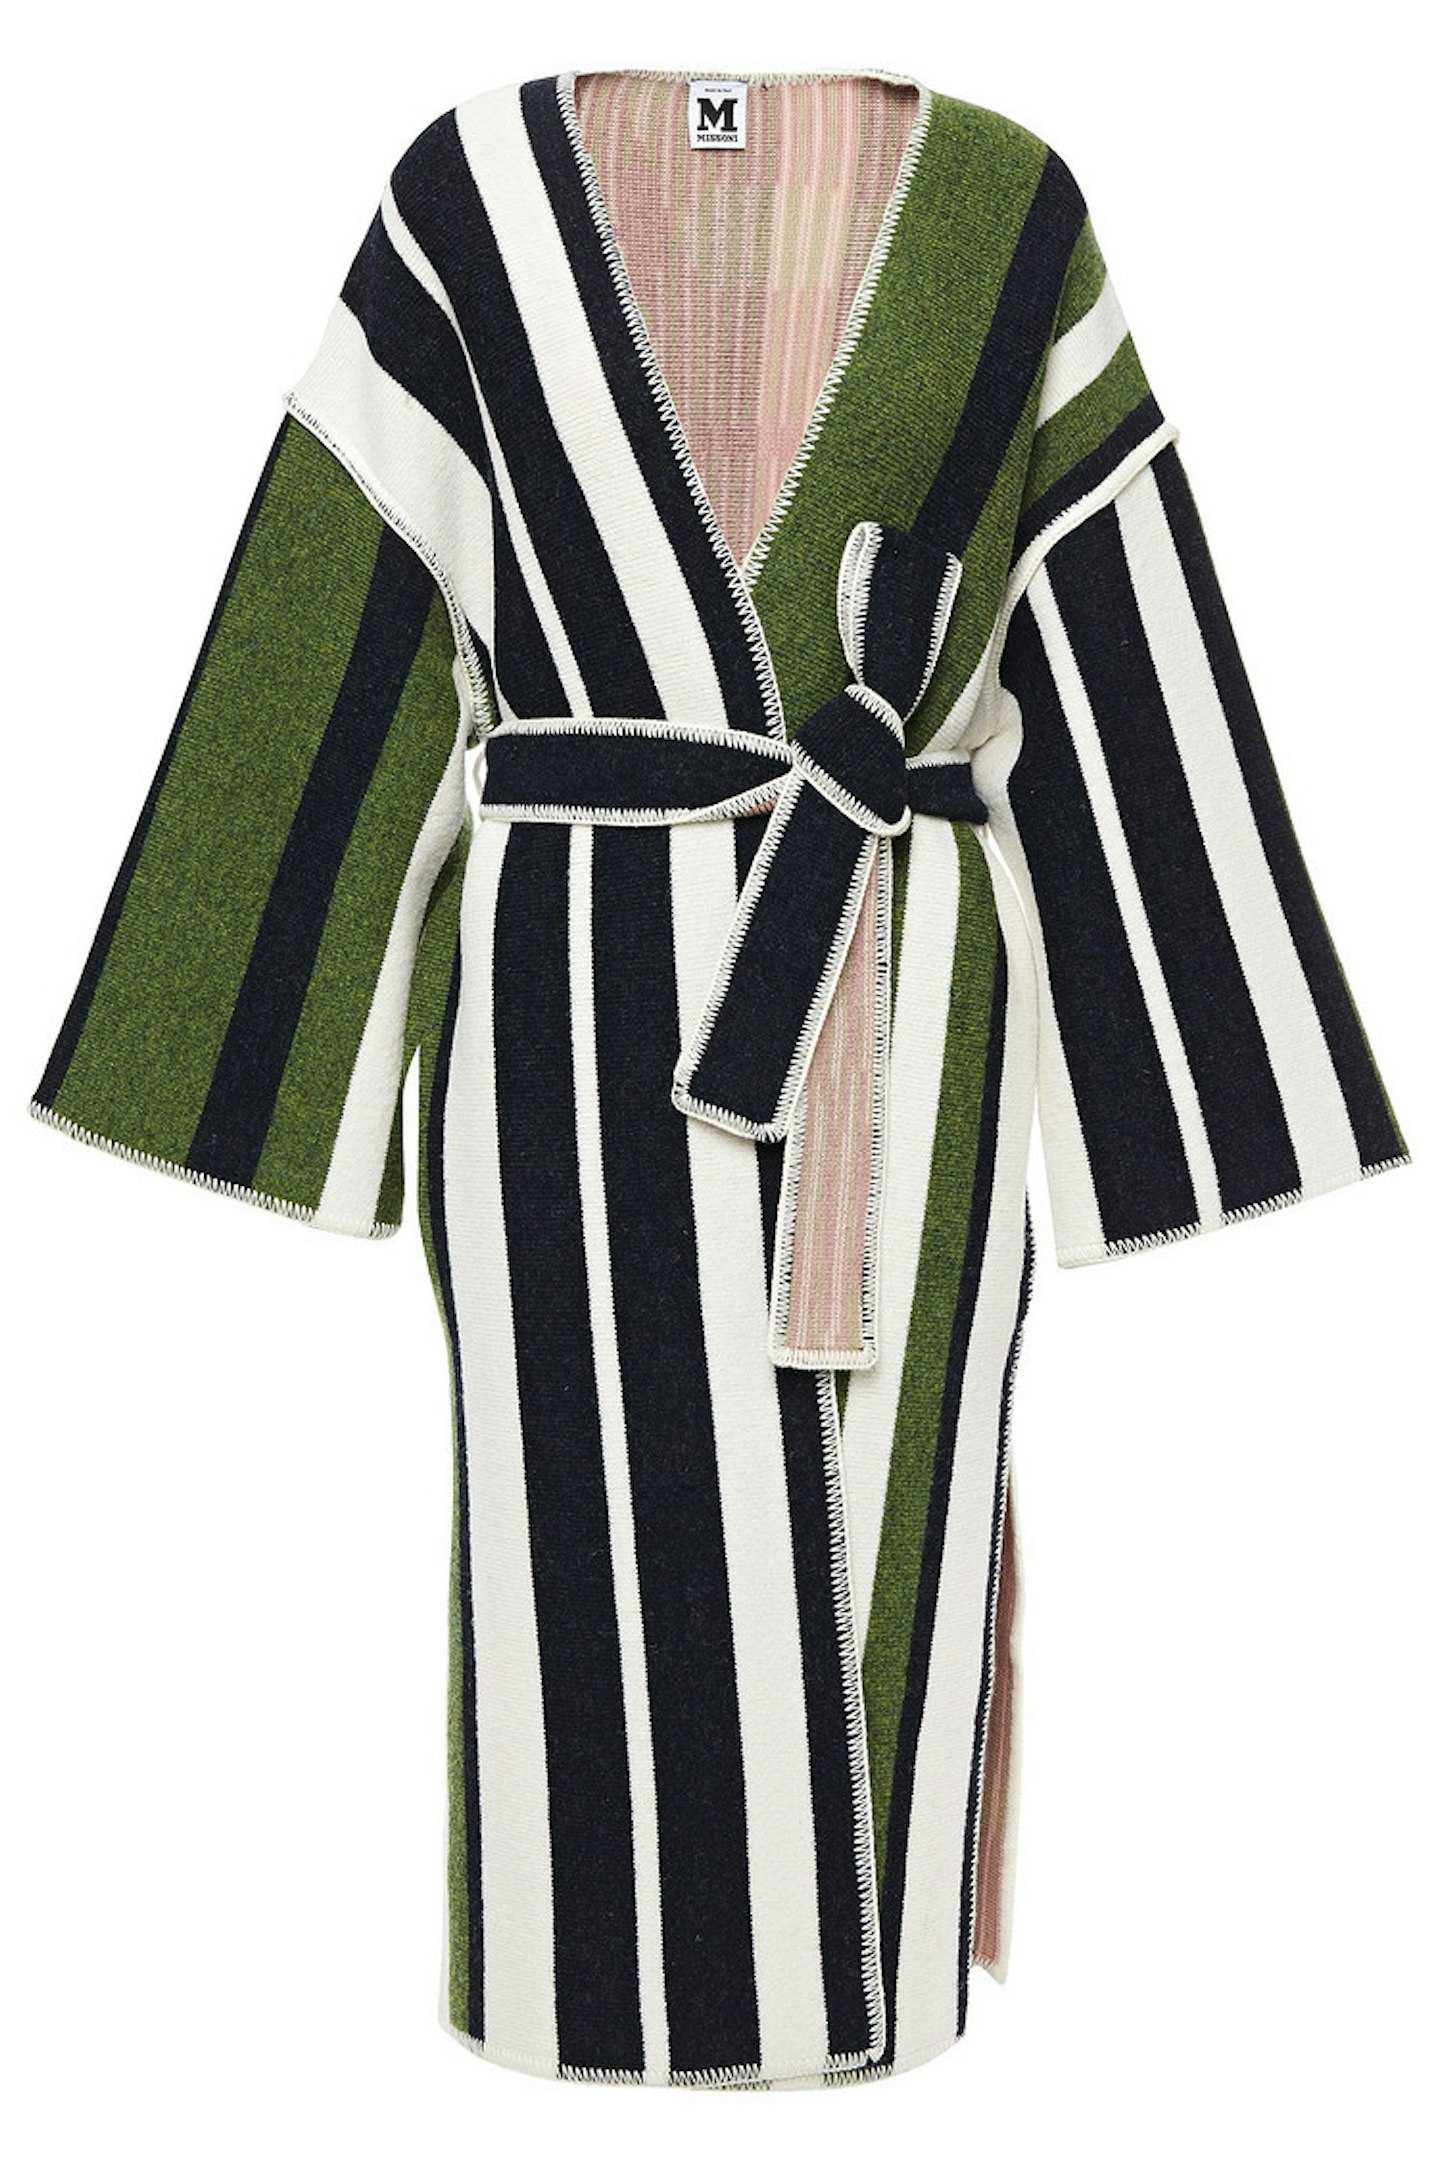 M Missoni, Belted striped jacquard-knit wool-blend cardigan, WAS £1,155, NOW £369